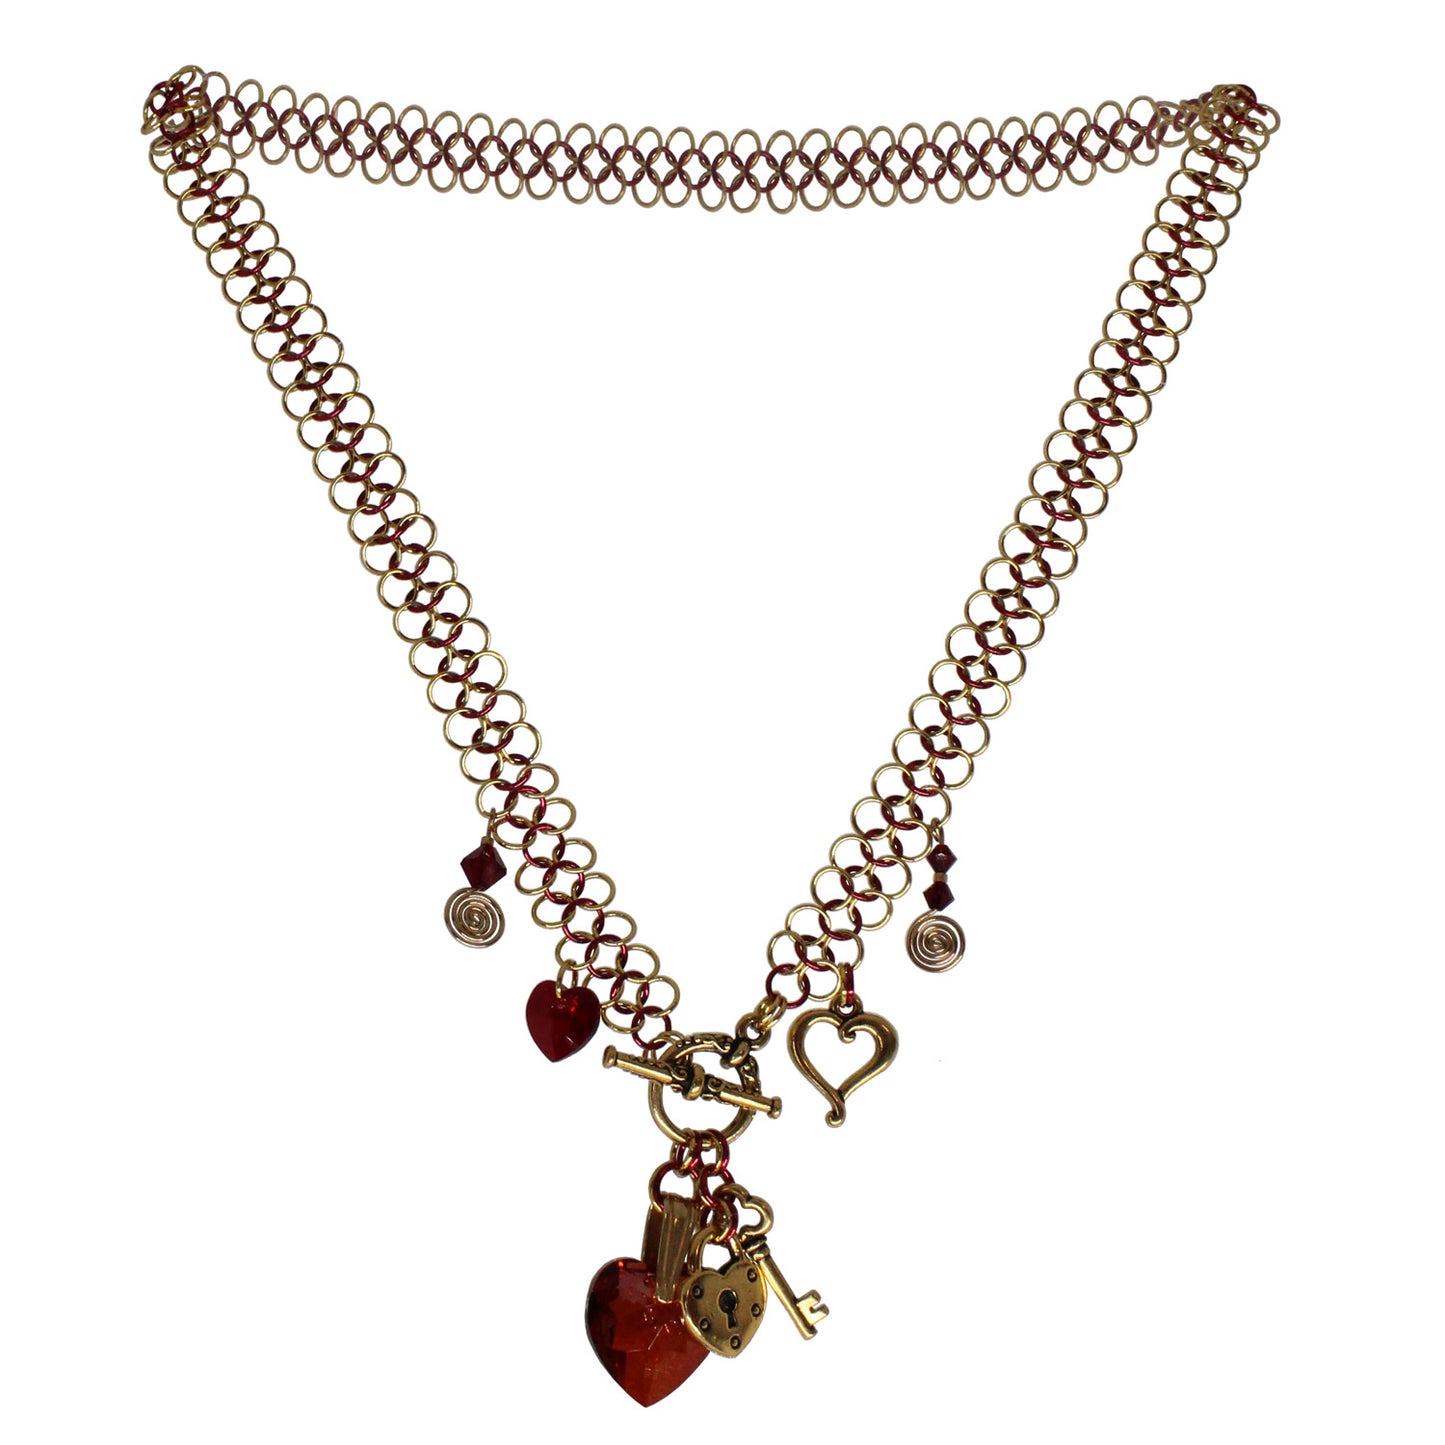 Lock and Key Chainmail Necklace / 22 Inch / crystal hearts with lock and key charms